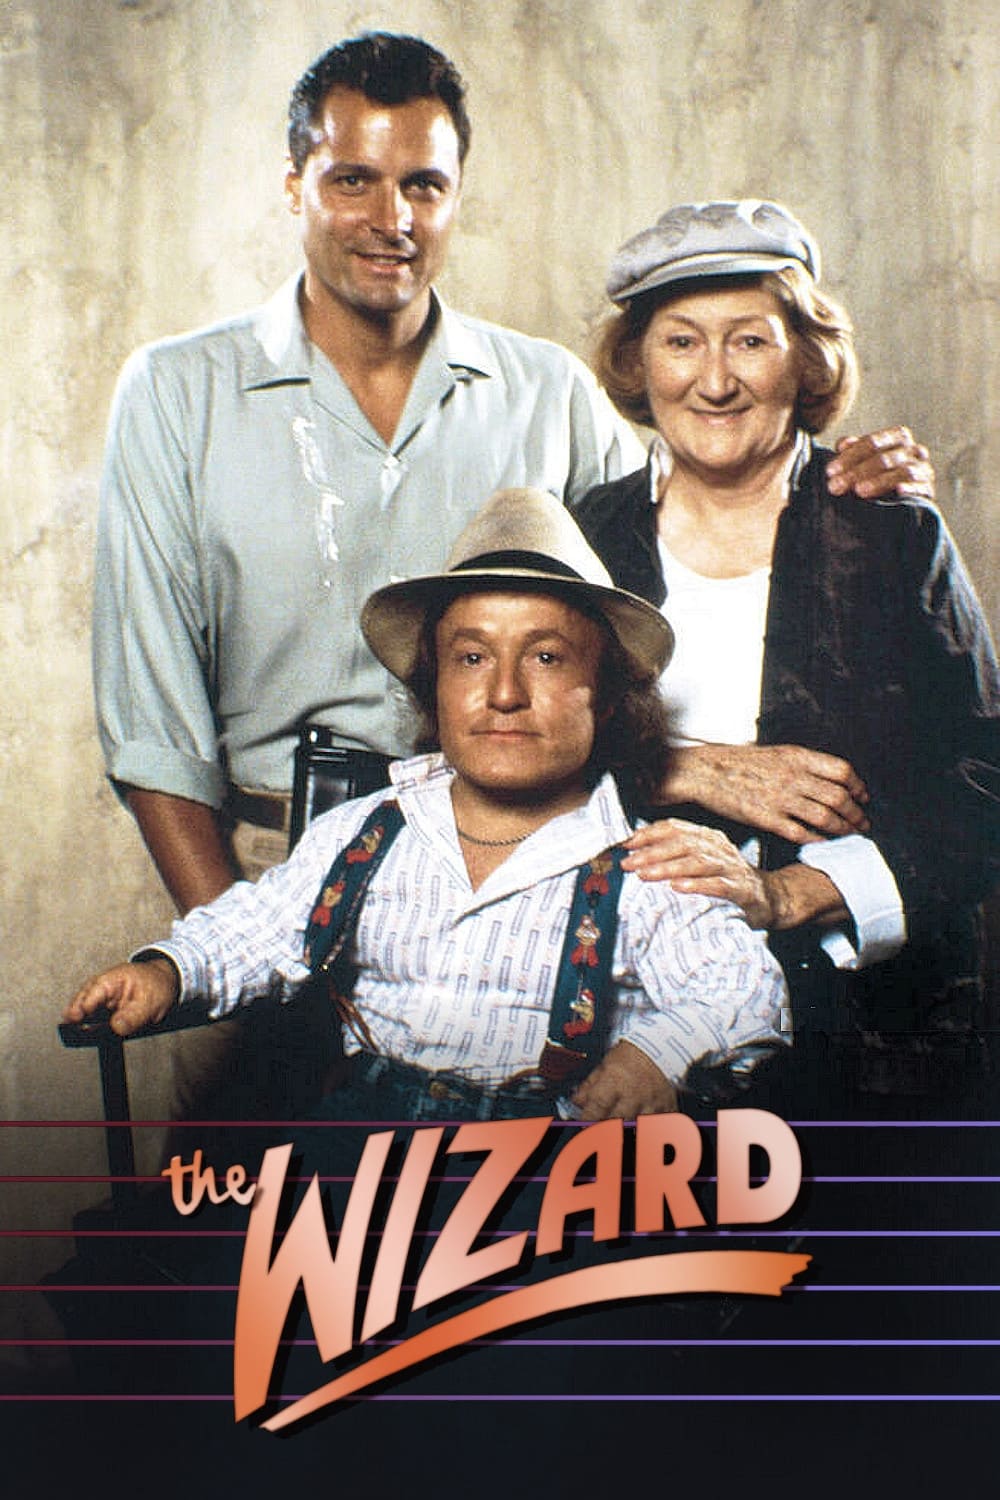 The Wizard (1986)